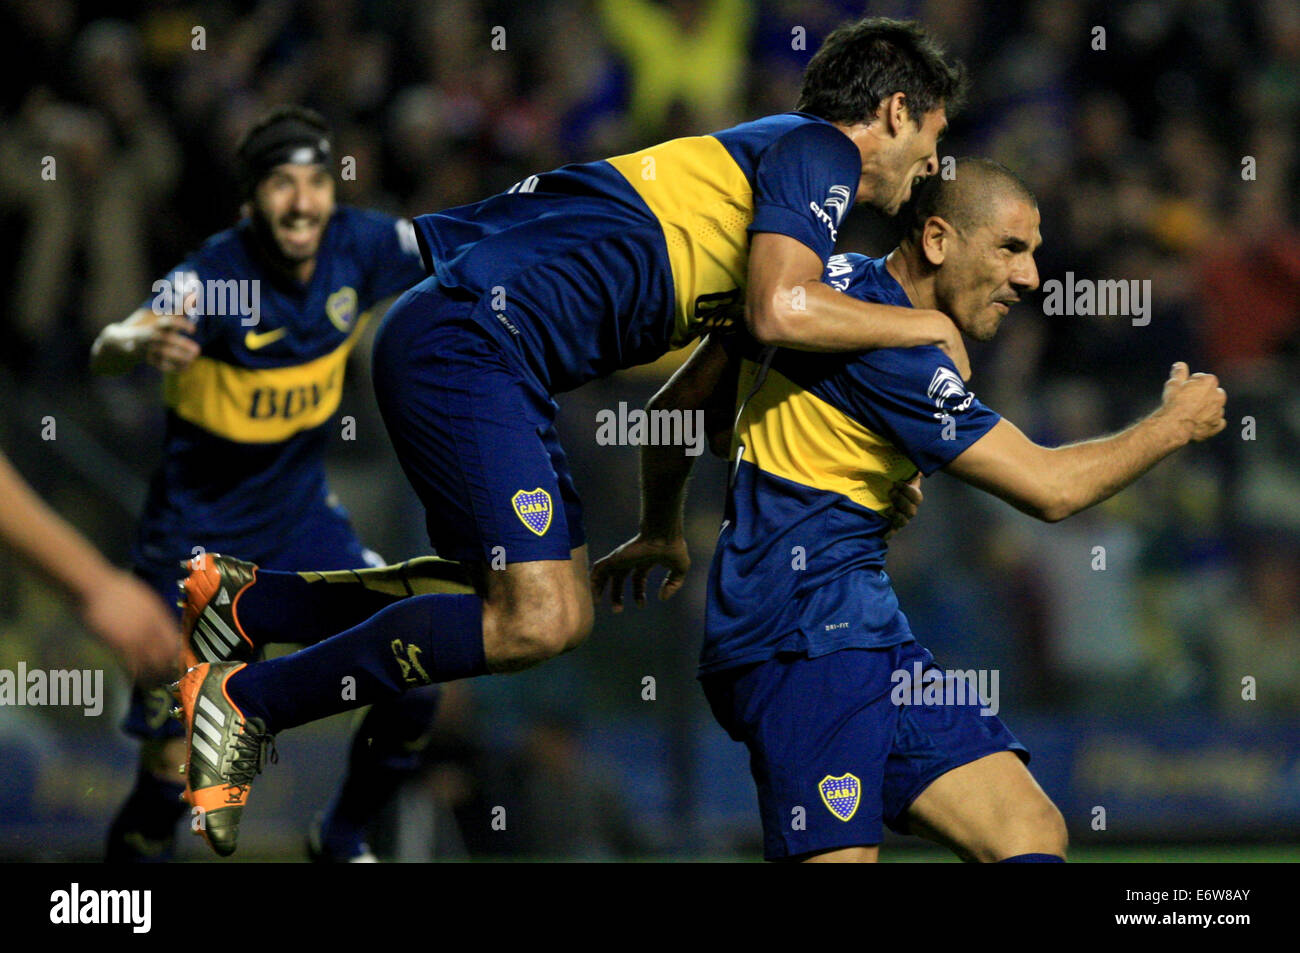 Buenos Aires, Argentina. 31st Aug, 2014. The player Daniel Diaz (R) of Boca Juniors, celebrates a scoring with his teammate Marcelo Meli (C), during the match of the Argentinean First Division Tournament against Velez Sarsfield, in the Alberto J. Armando Stadium, in Buenos Aires, Argentina, on Aug. 31, 2014. (Xinhua/Martin Zabala) (jp) (ah) Credit:  Xinhua/Alamy Live News Stock Photo